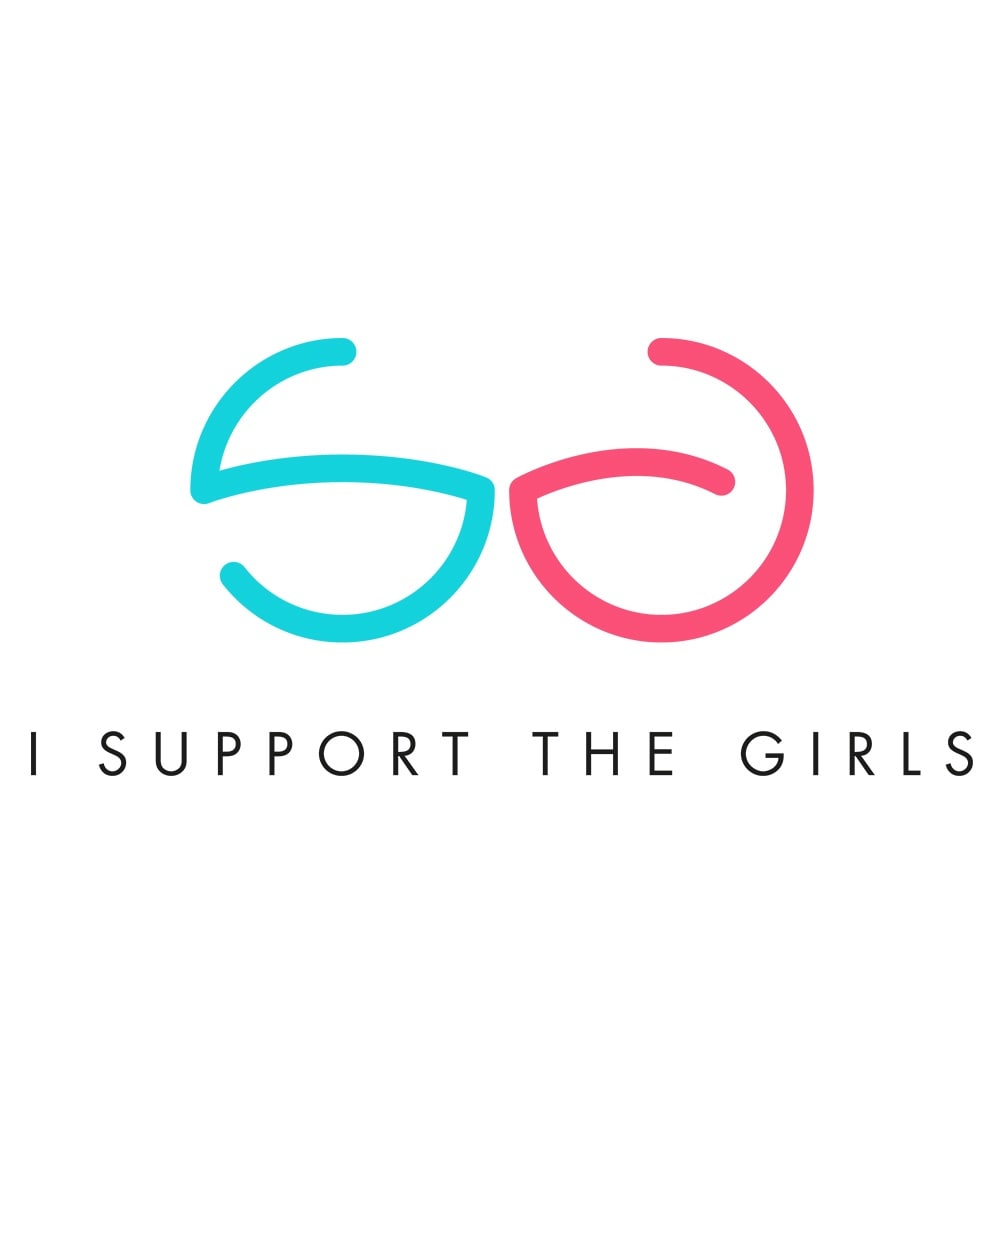 I Support the Girls